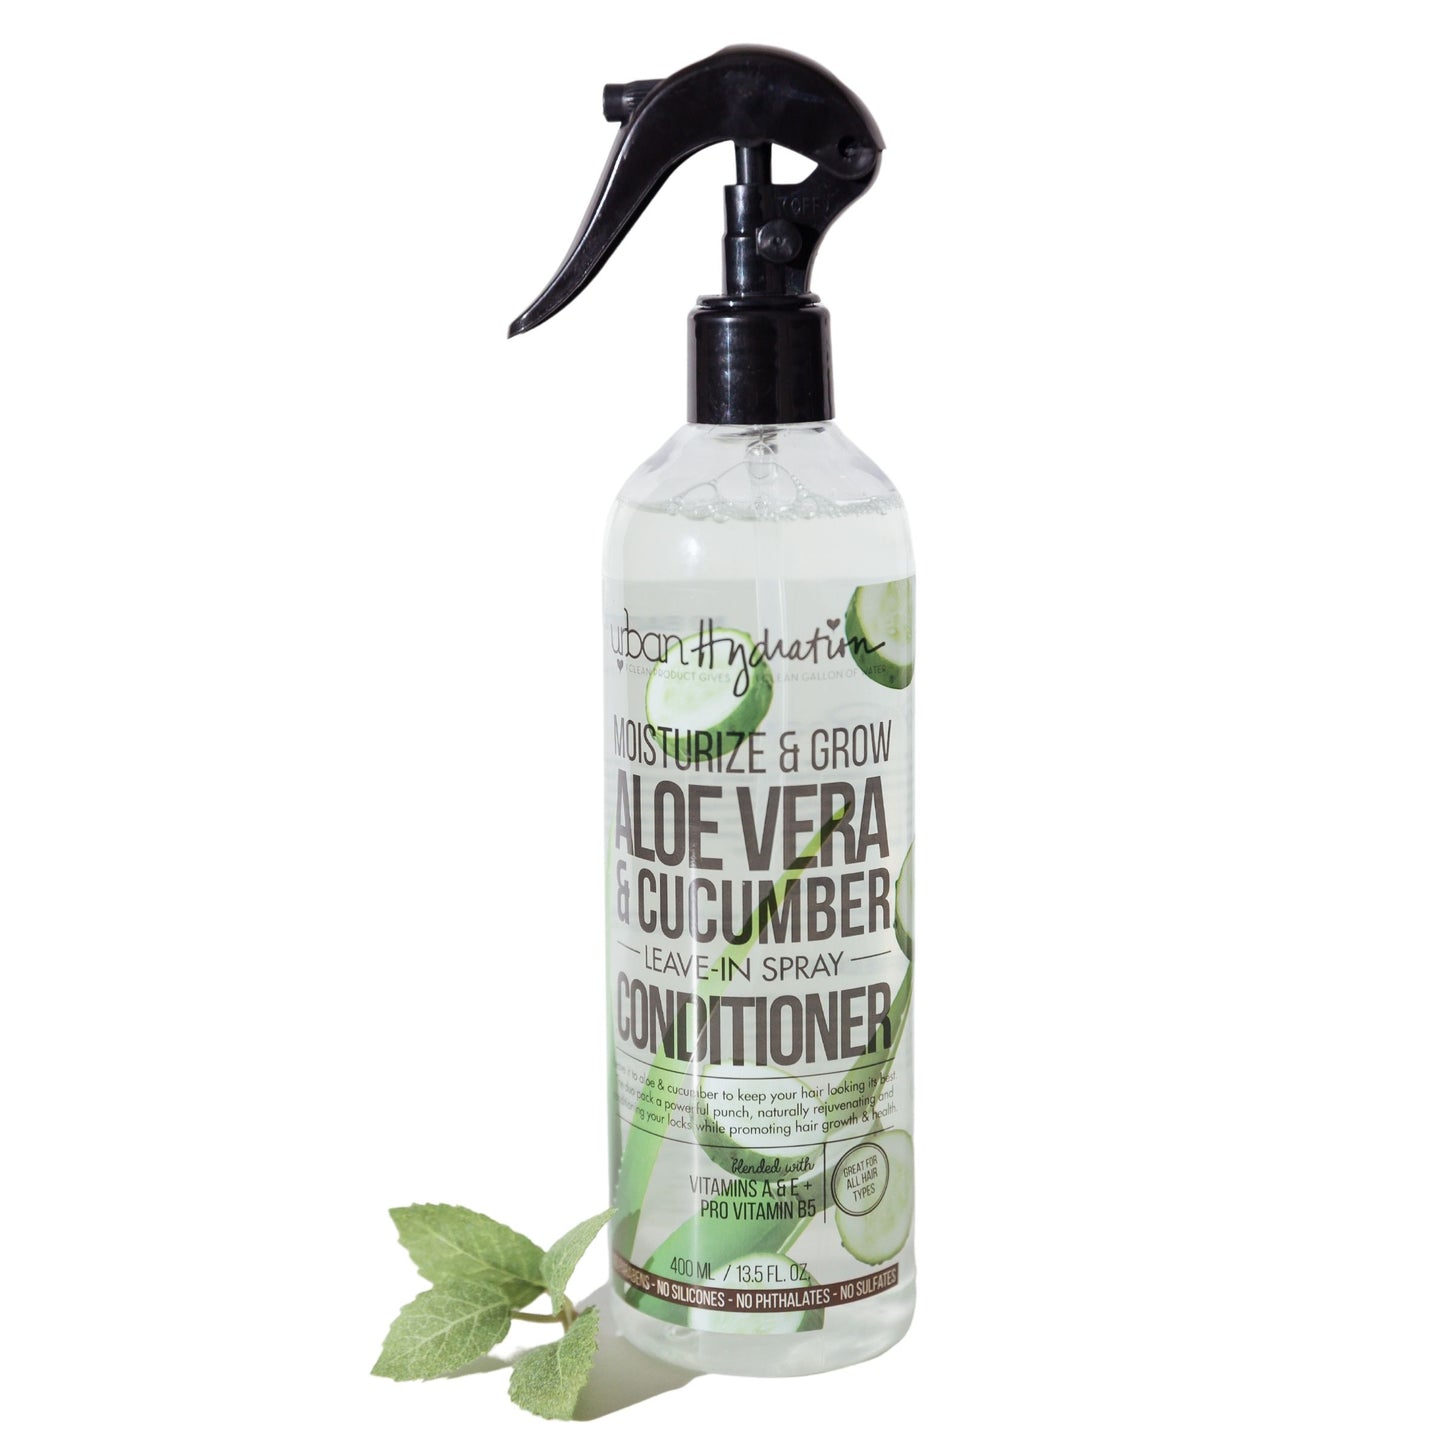 Ampere Dolke lettelse Hydrate & Grow Aloe Vera & Cucumber Leave-in Spray Conditioner – Urban  Hydration